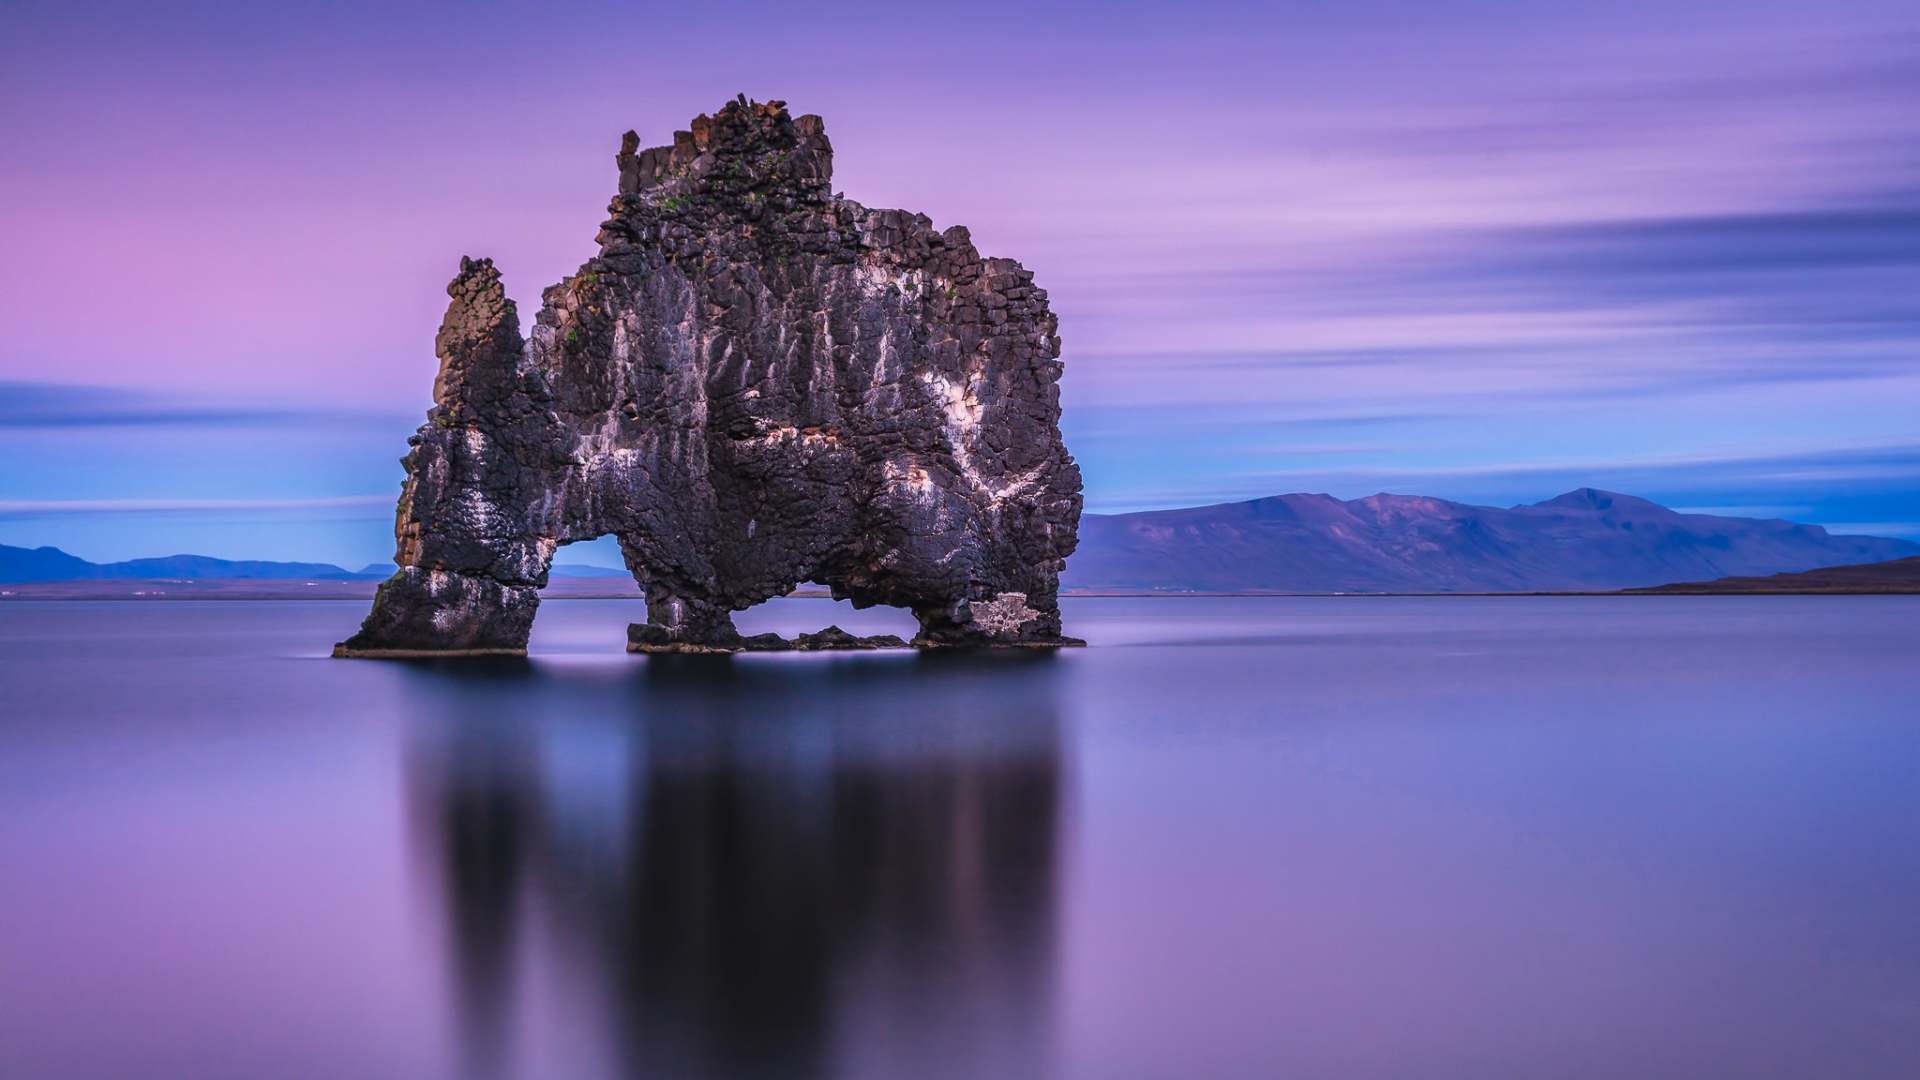 Nature Landscape Water Long Exposure Rock Formation Clouds Sea Mountains Rock Imagination Reflection 1920x1080